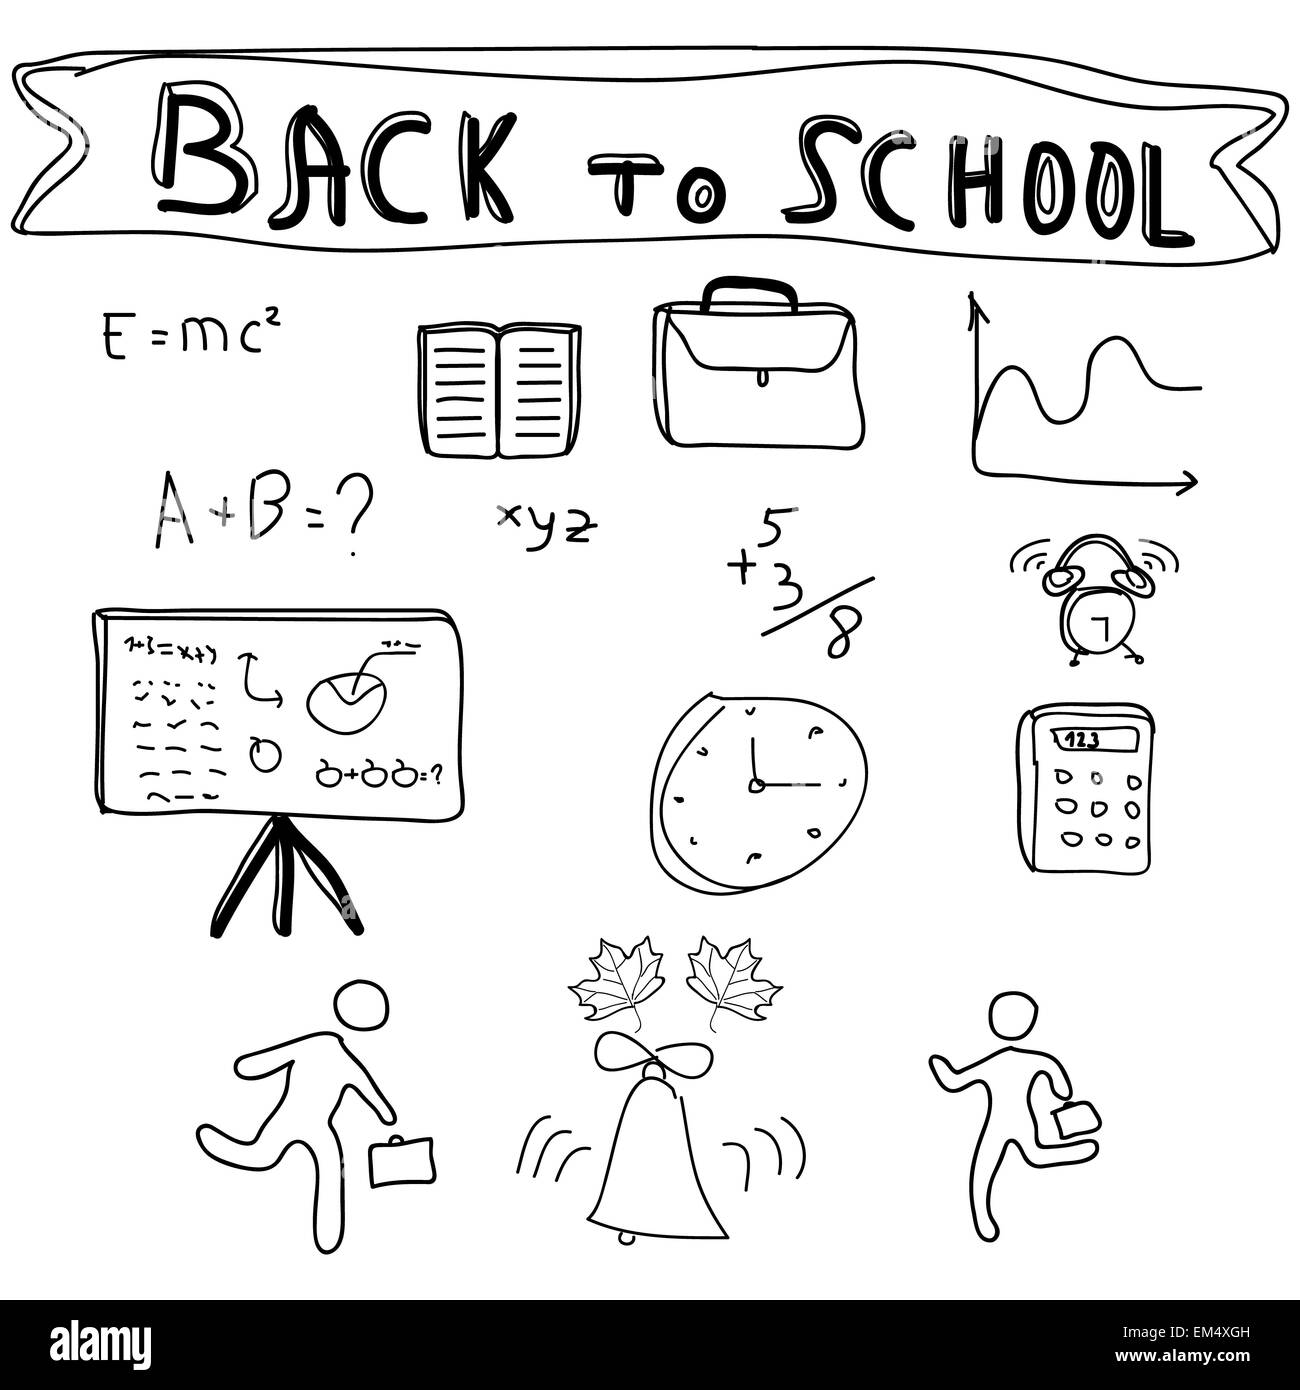 Back to School Supplies Sketchy Doodles Stock Photo